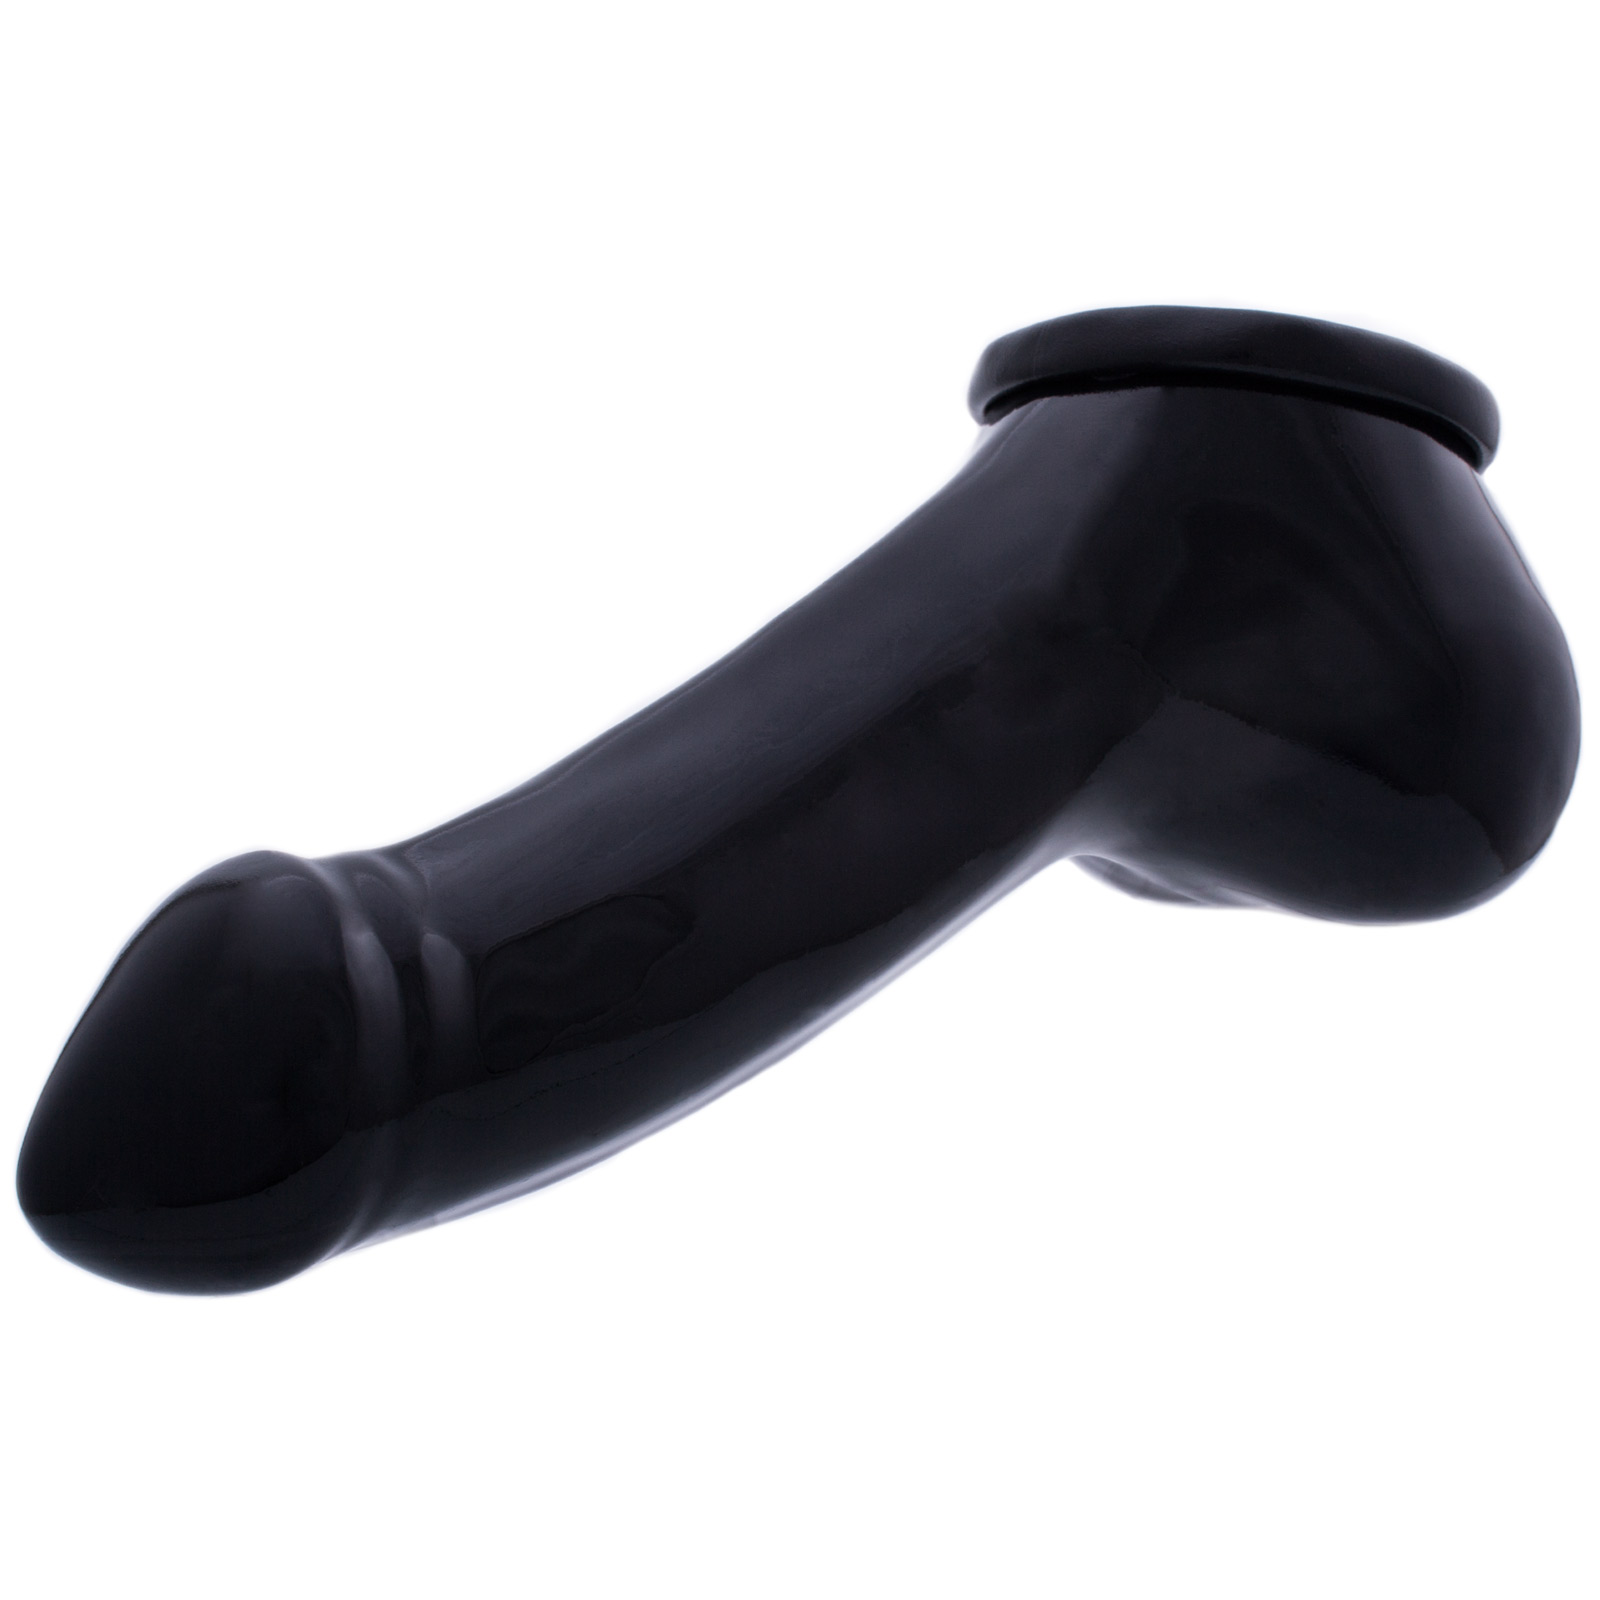 Toylie Latex Penis Sleeve «ADAM 5.5» black, with molded glans and scrotum - suitable for vegans